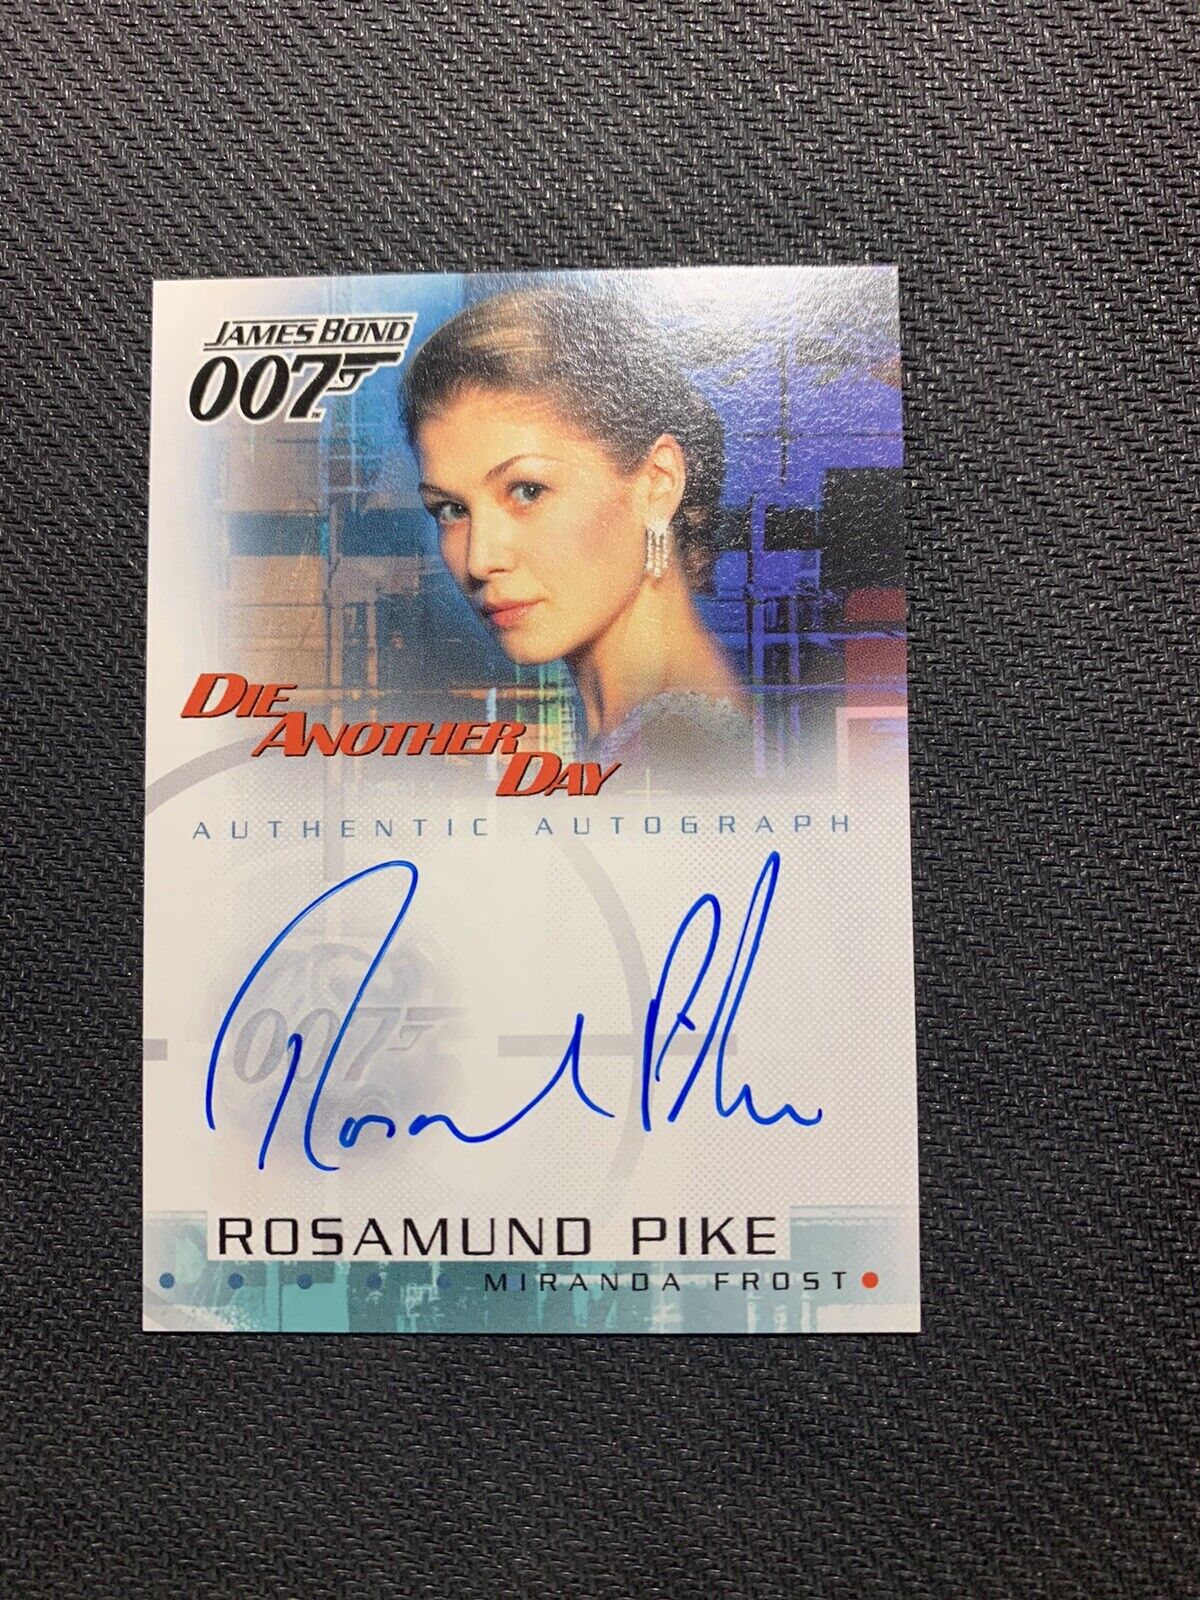 James Bond: Die Another Day 2002 Autograph Card A5 Rosamund Pike _ Miranda Frost